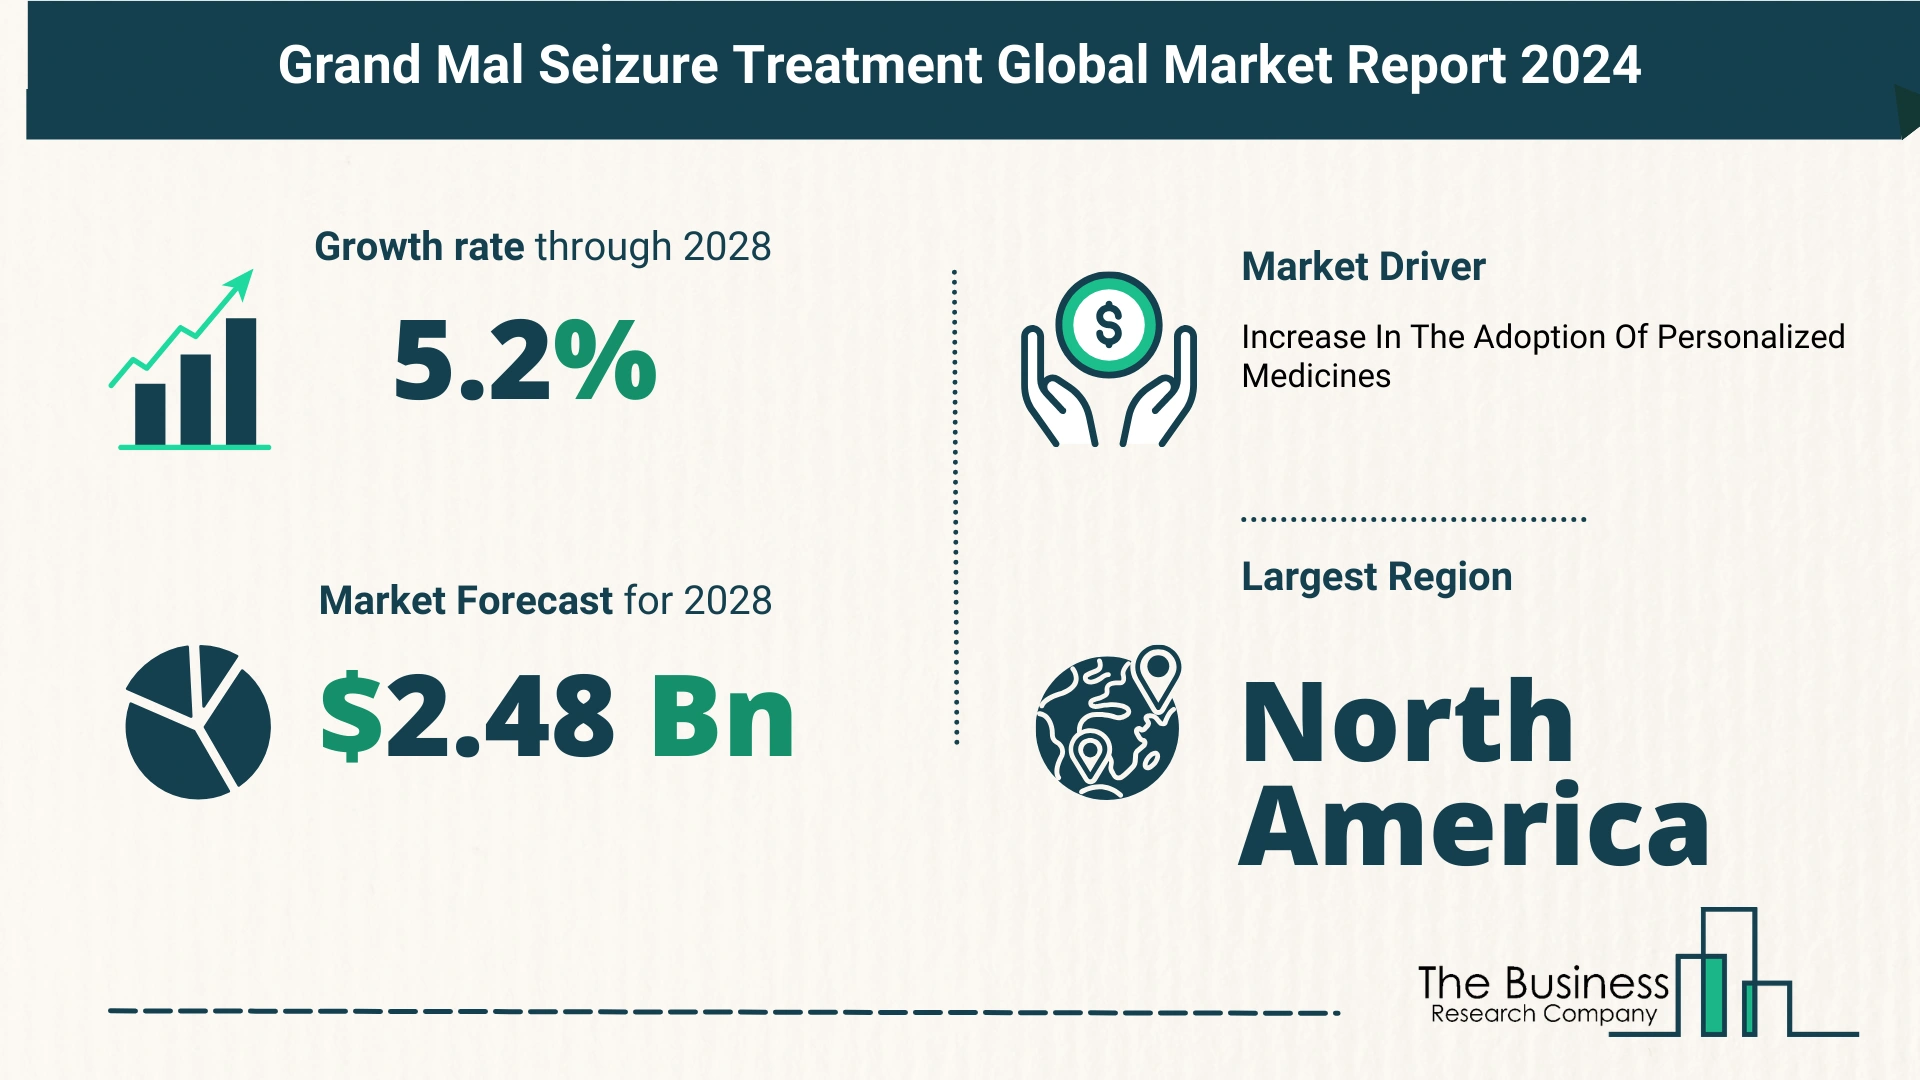 What Is The Forecast Growth Rate For The Grand Mal Seizure Treatment Market?